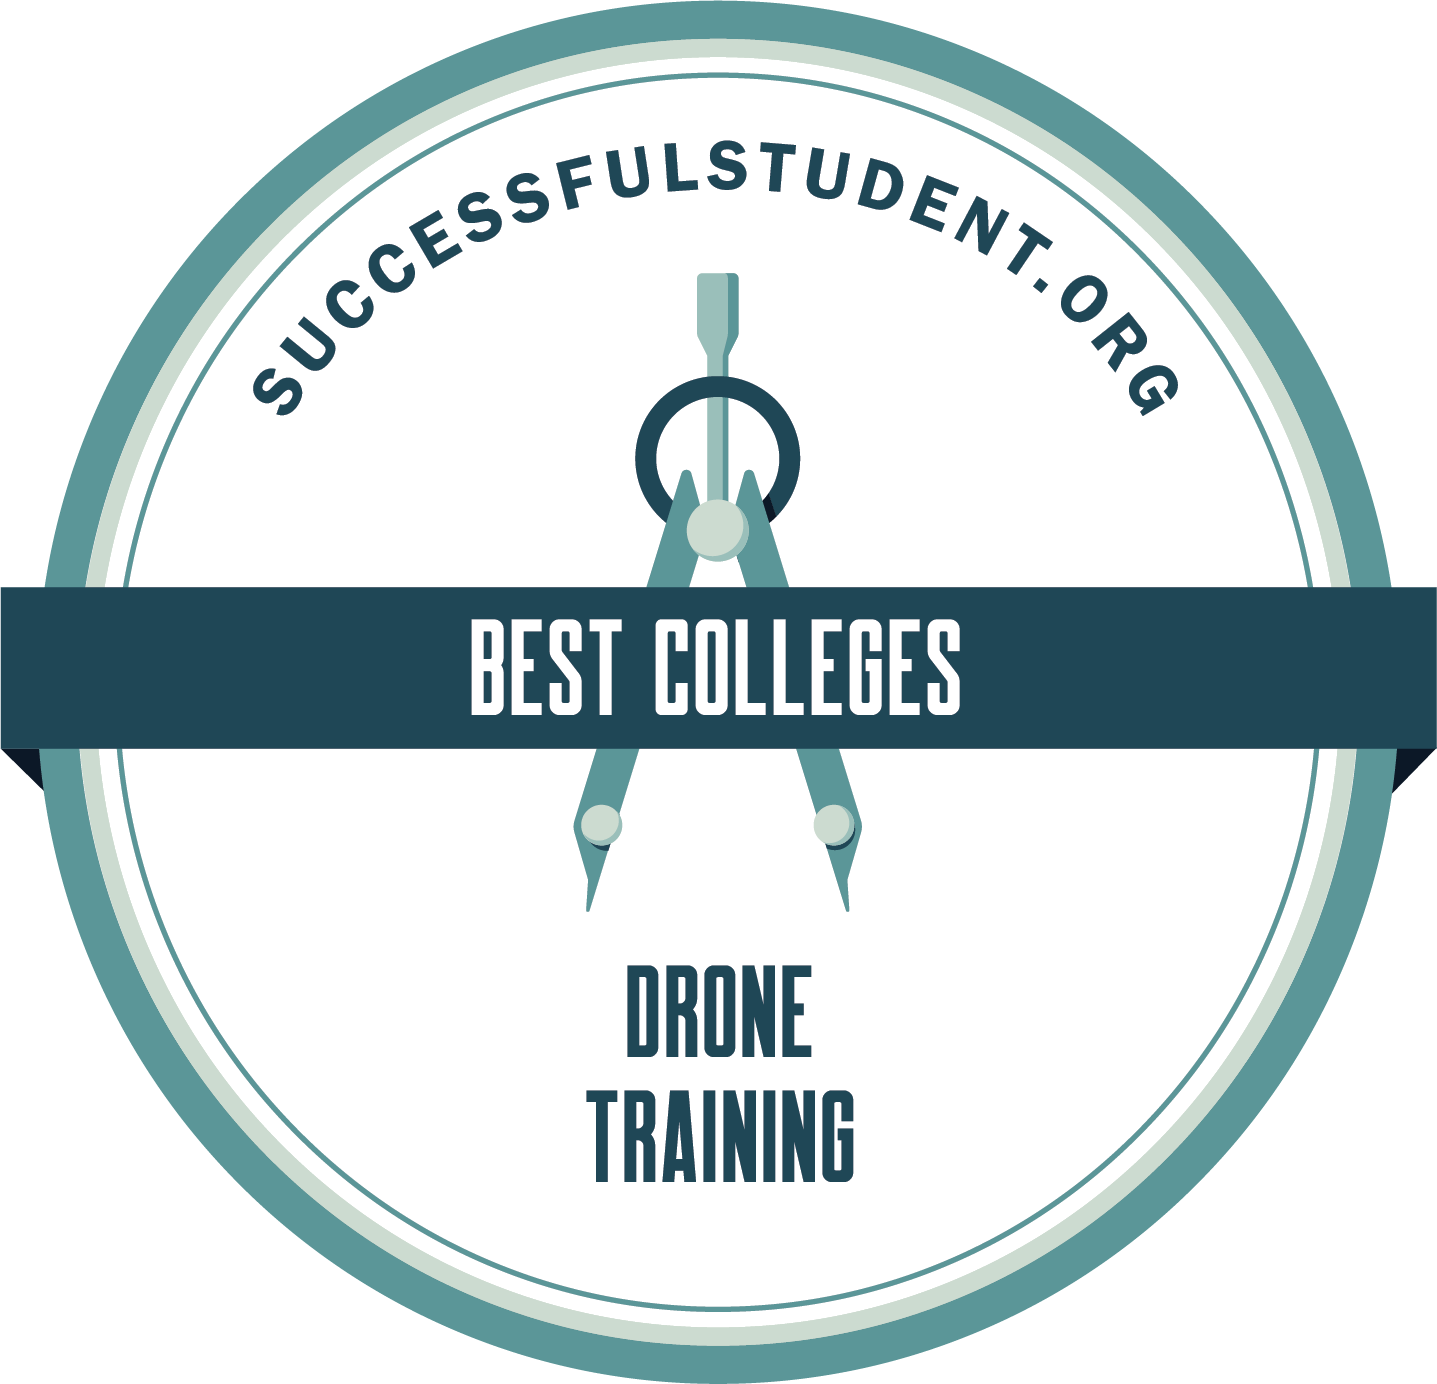 The Best Drone Training Colleges's Badge